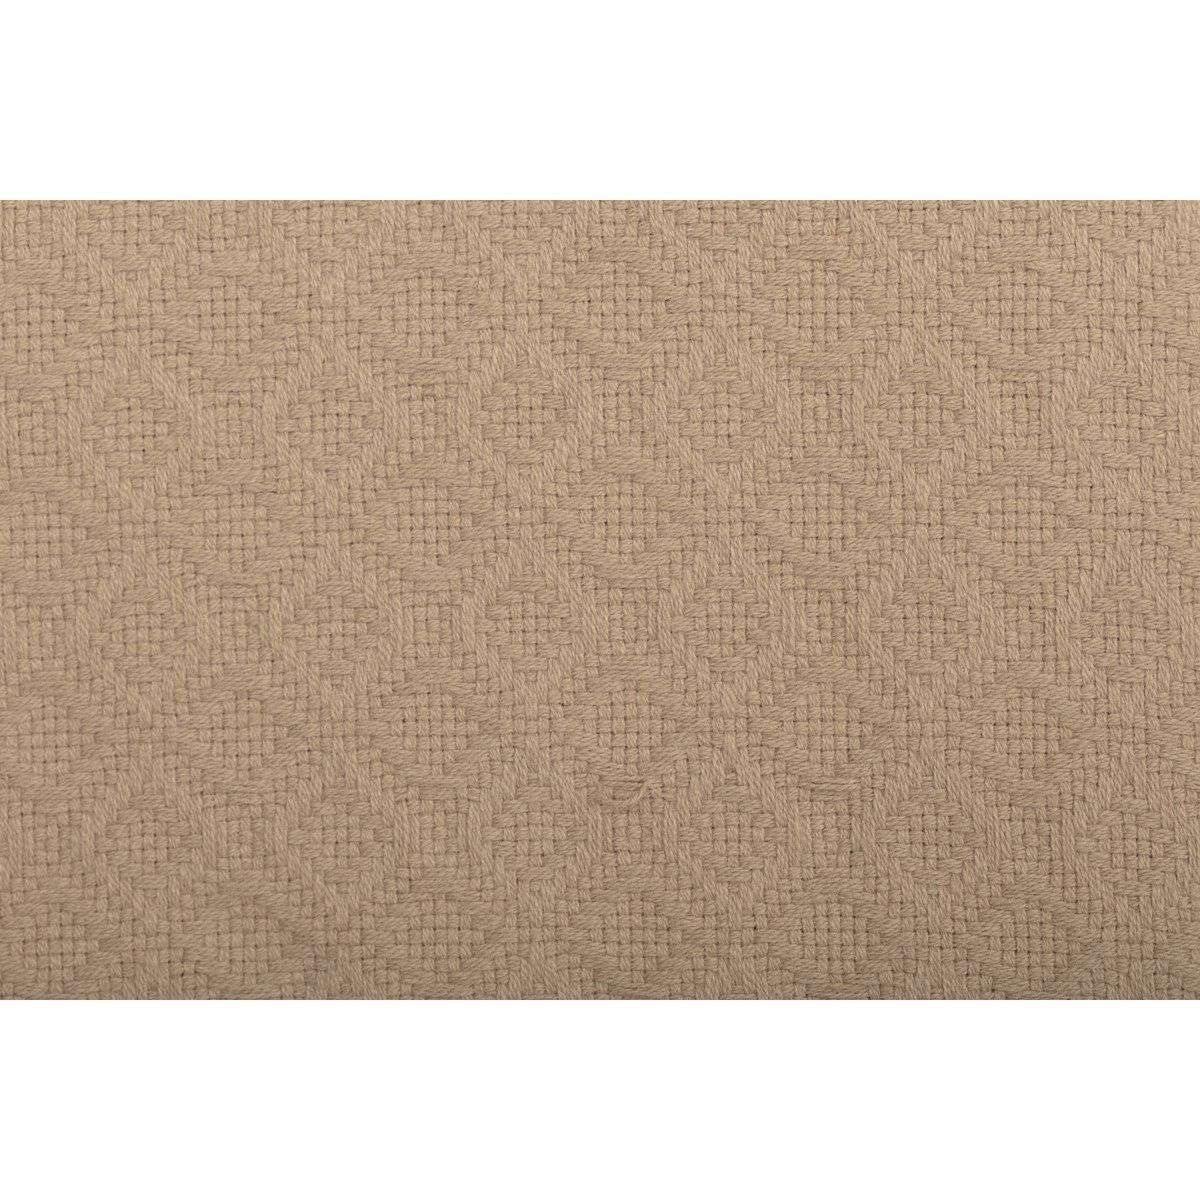 Serenity Tan Cotton Woven Blanket VHC Brands zoom